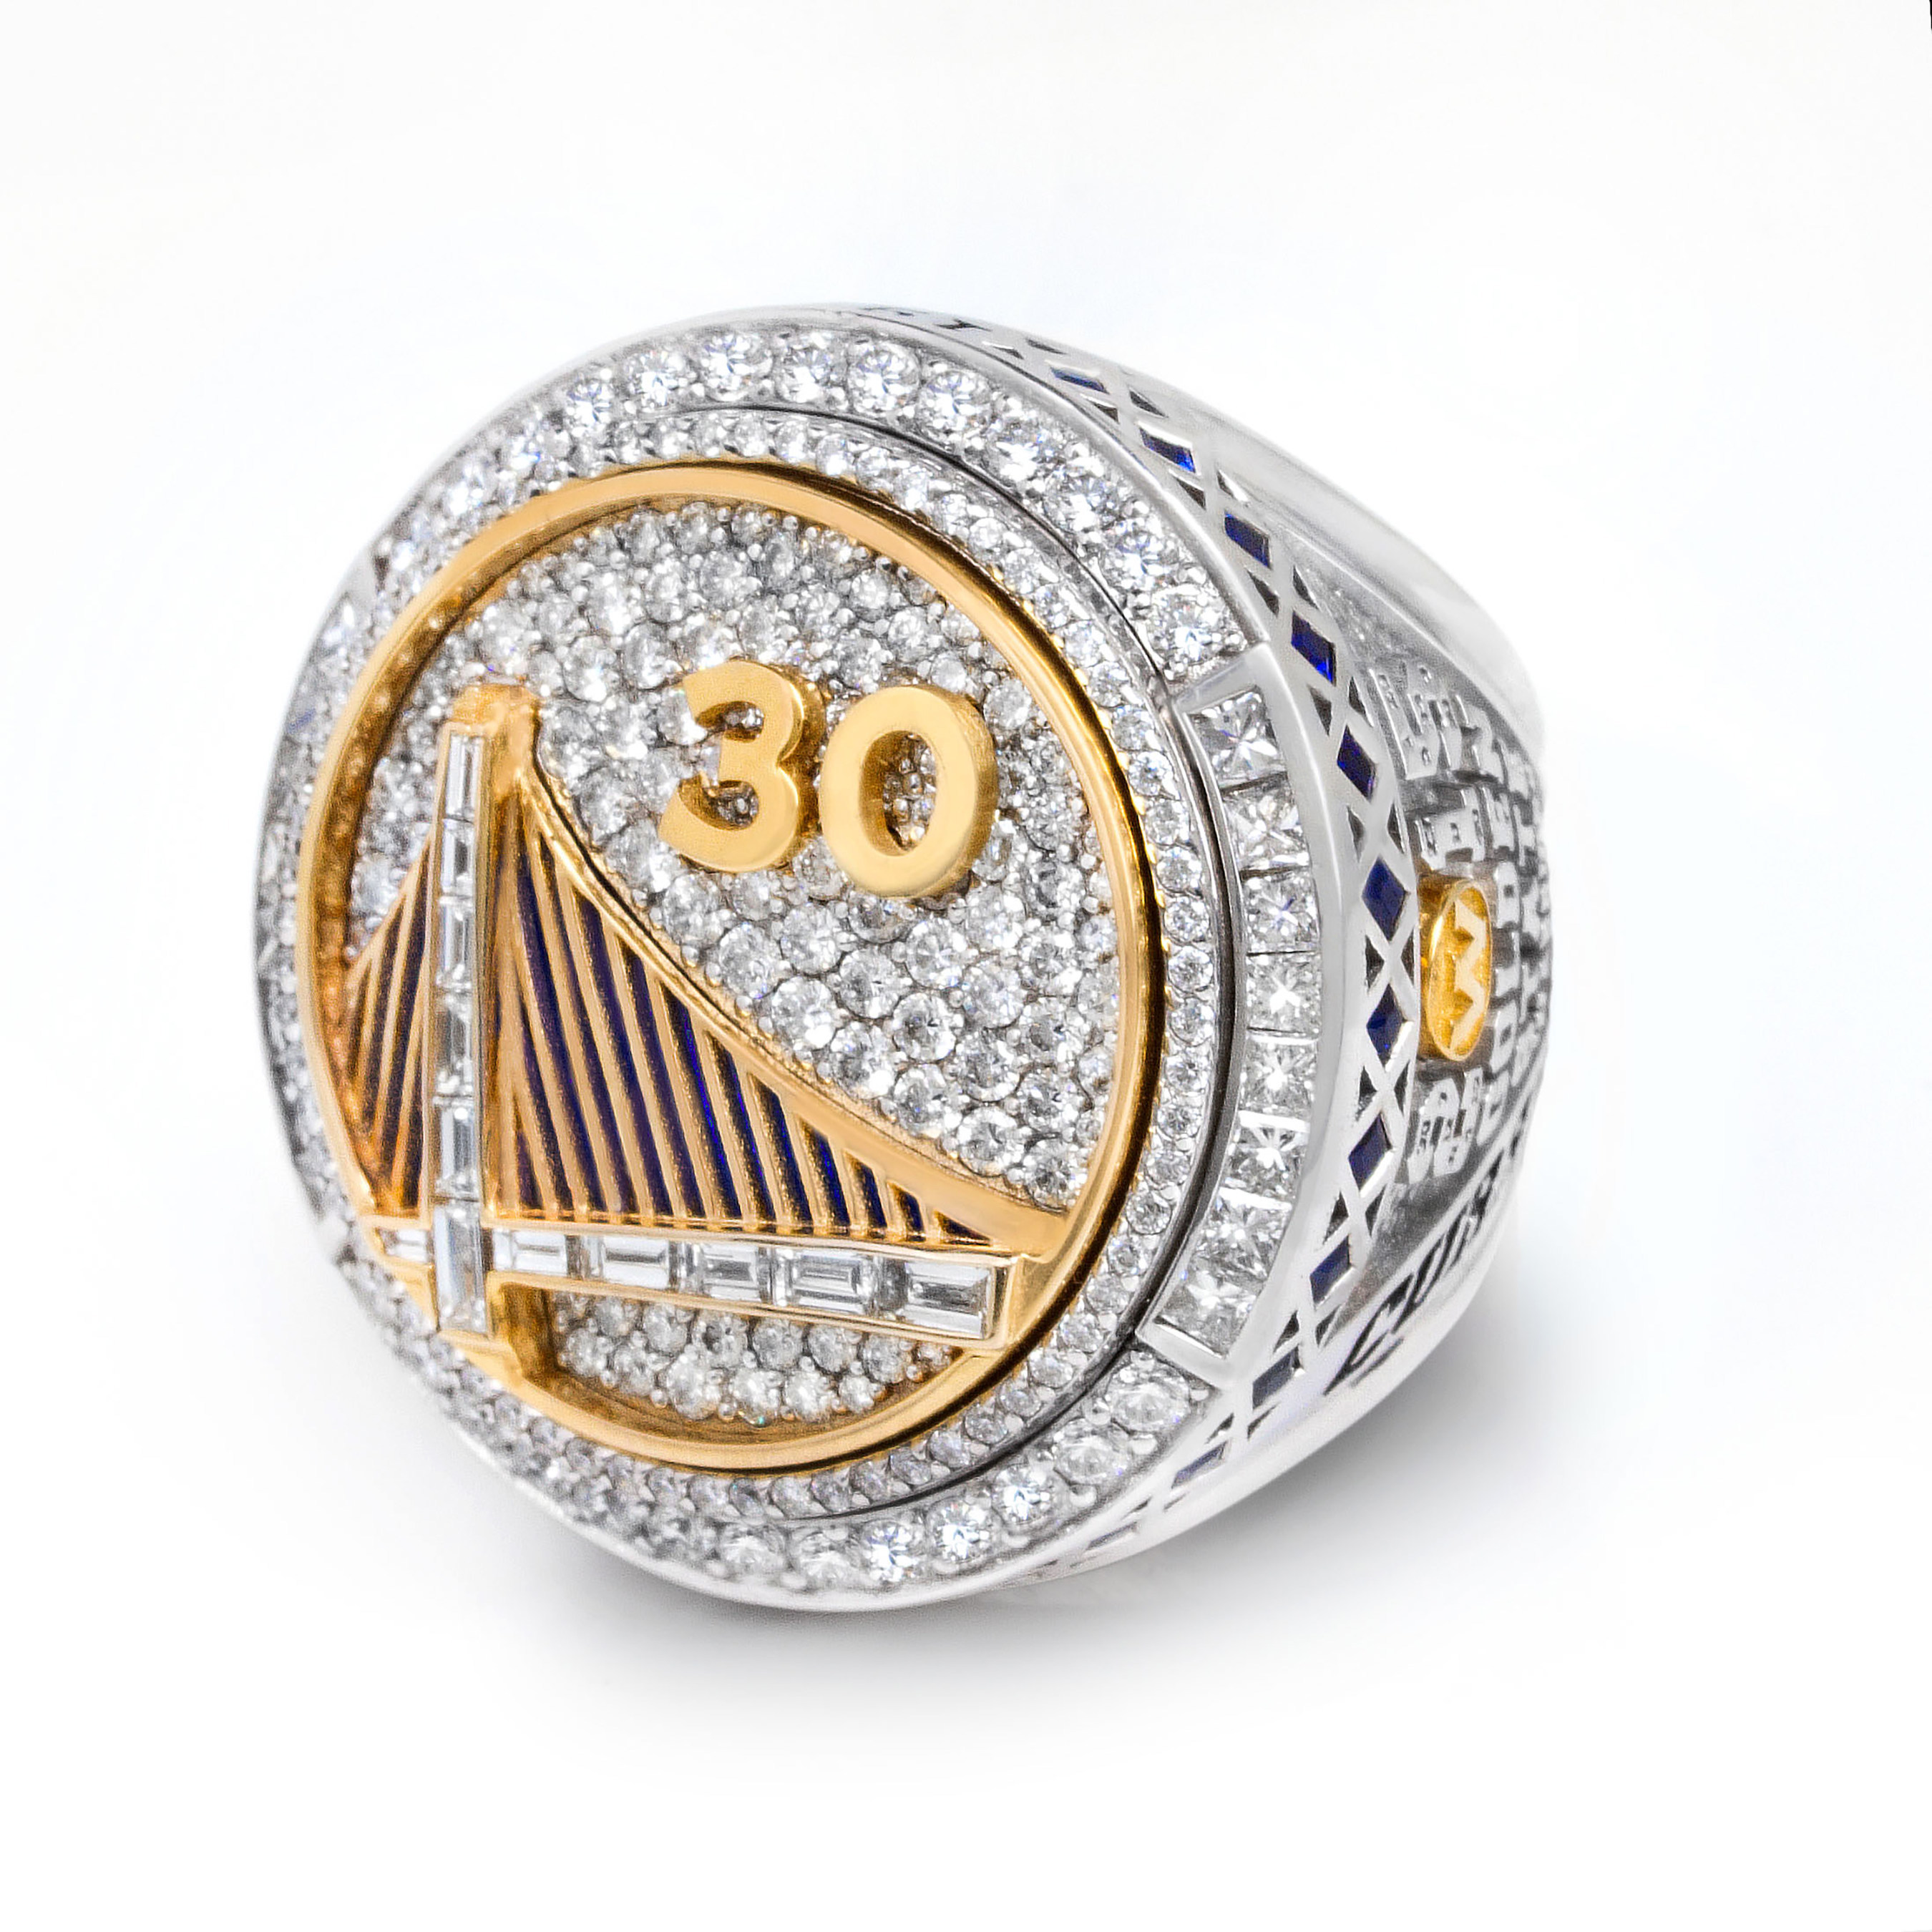 2015 NBA Championship ring designed by Jason of Beverly Hills unveiled at Golden State Warriors Home Opener